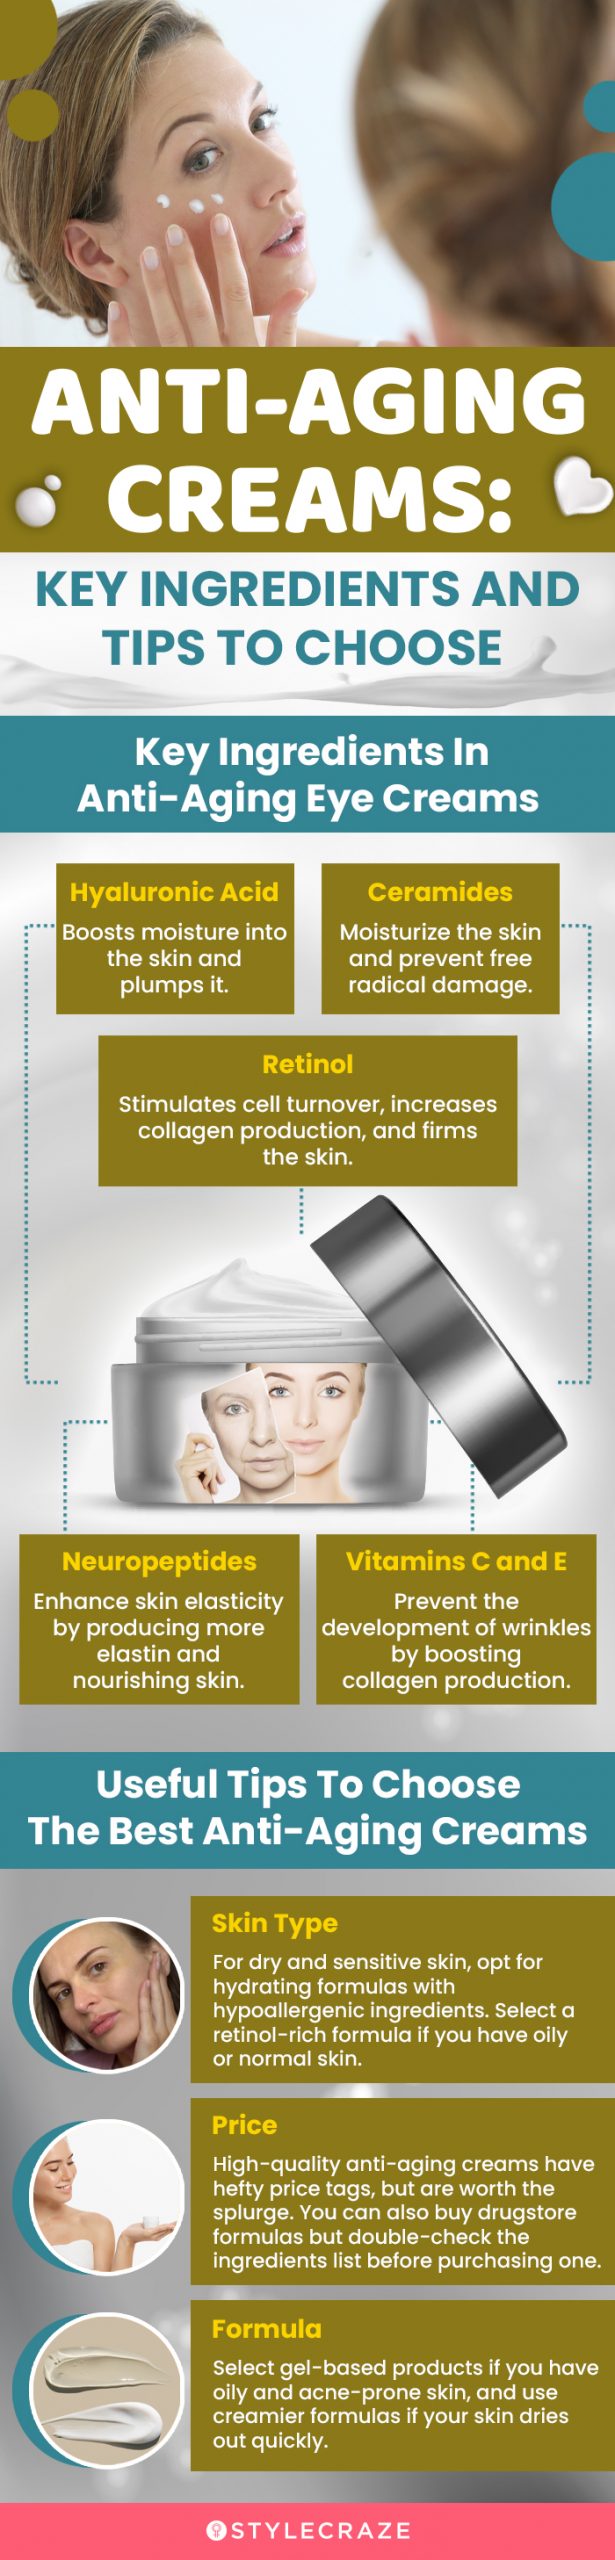 Anti-Aging Creams: Key Ingredients And Tips To Choose (infographic)